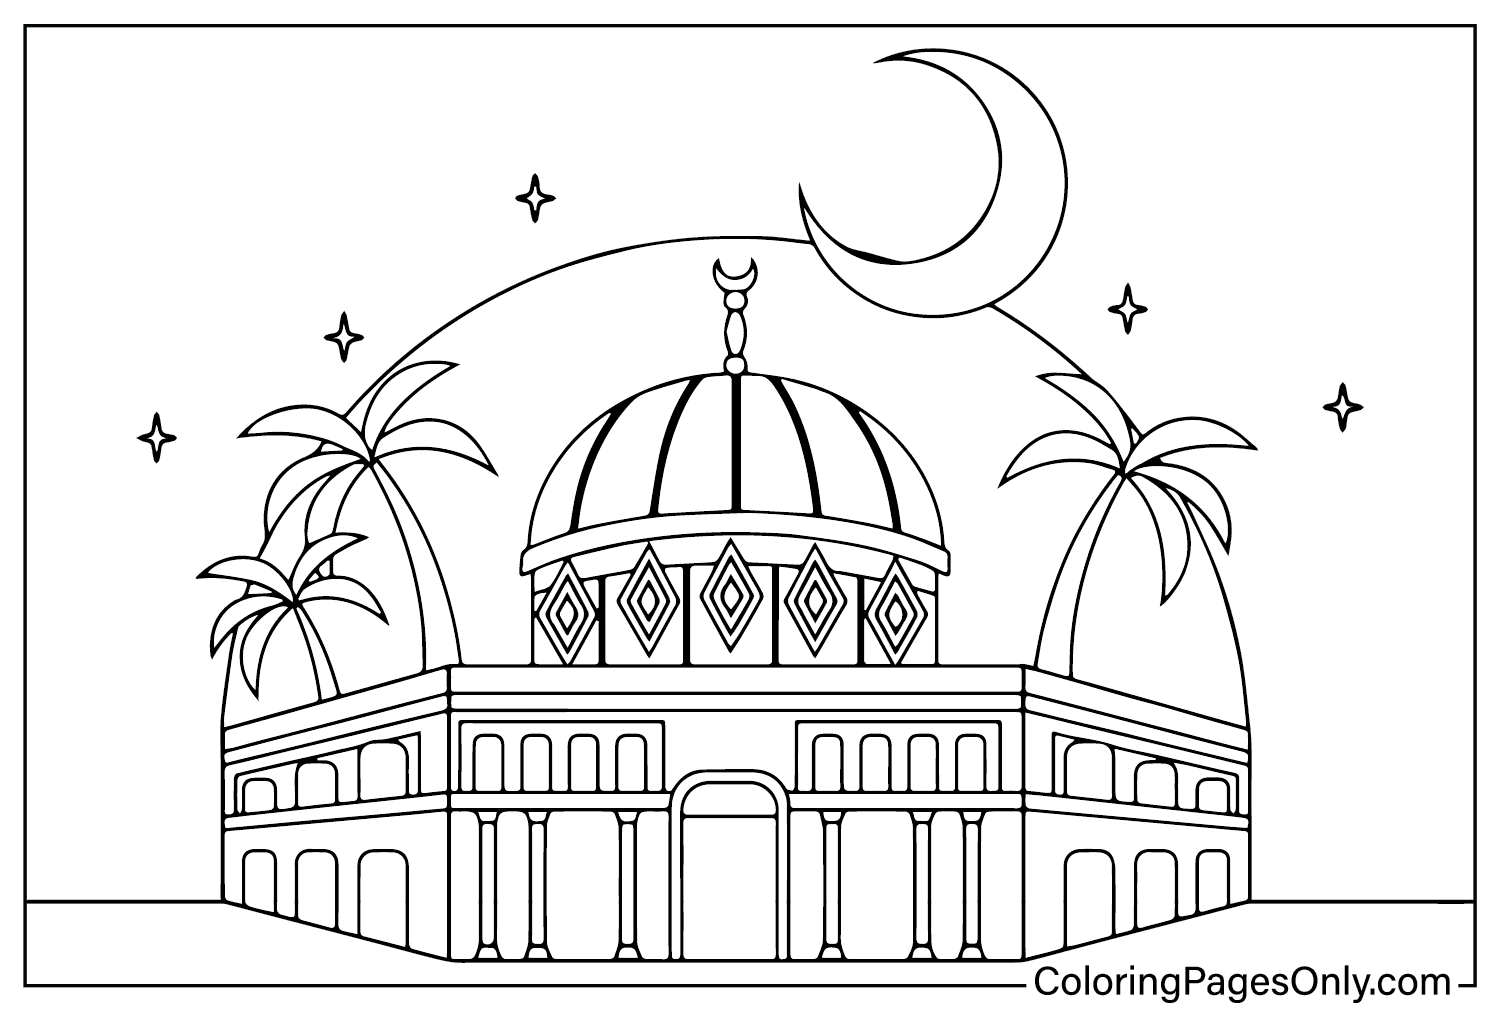 Palestine Coloring Page from Palestine